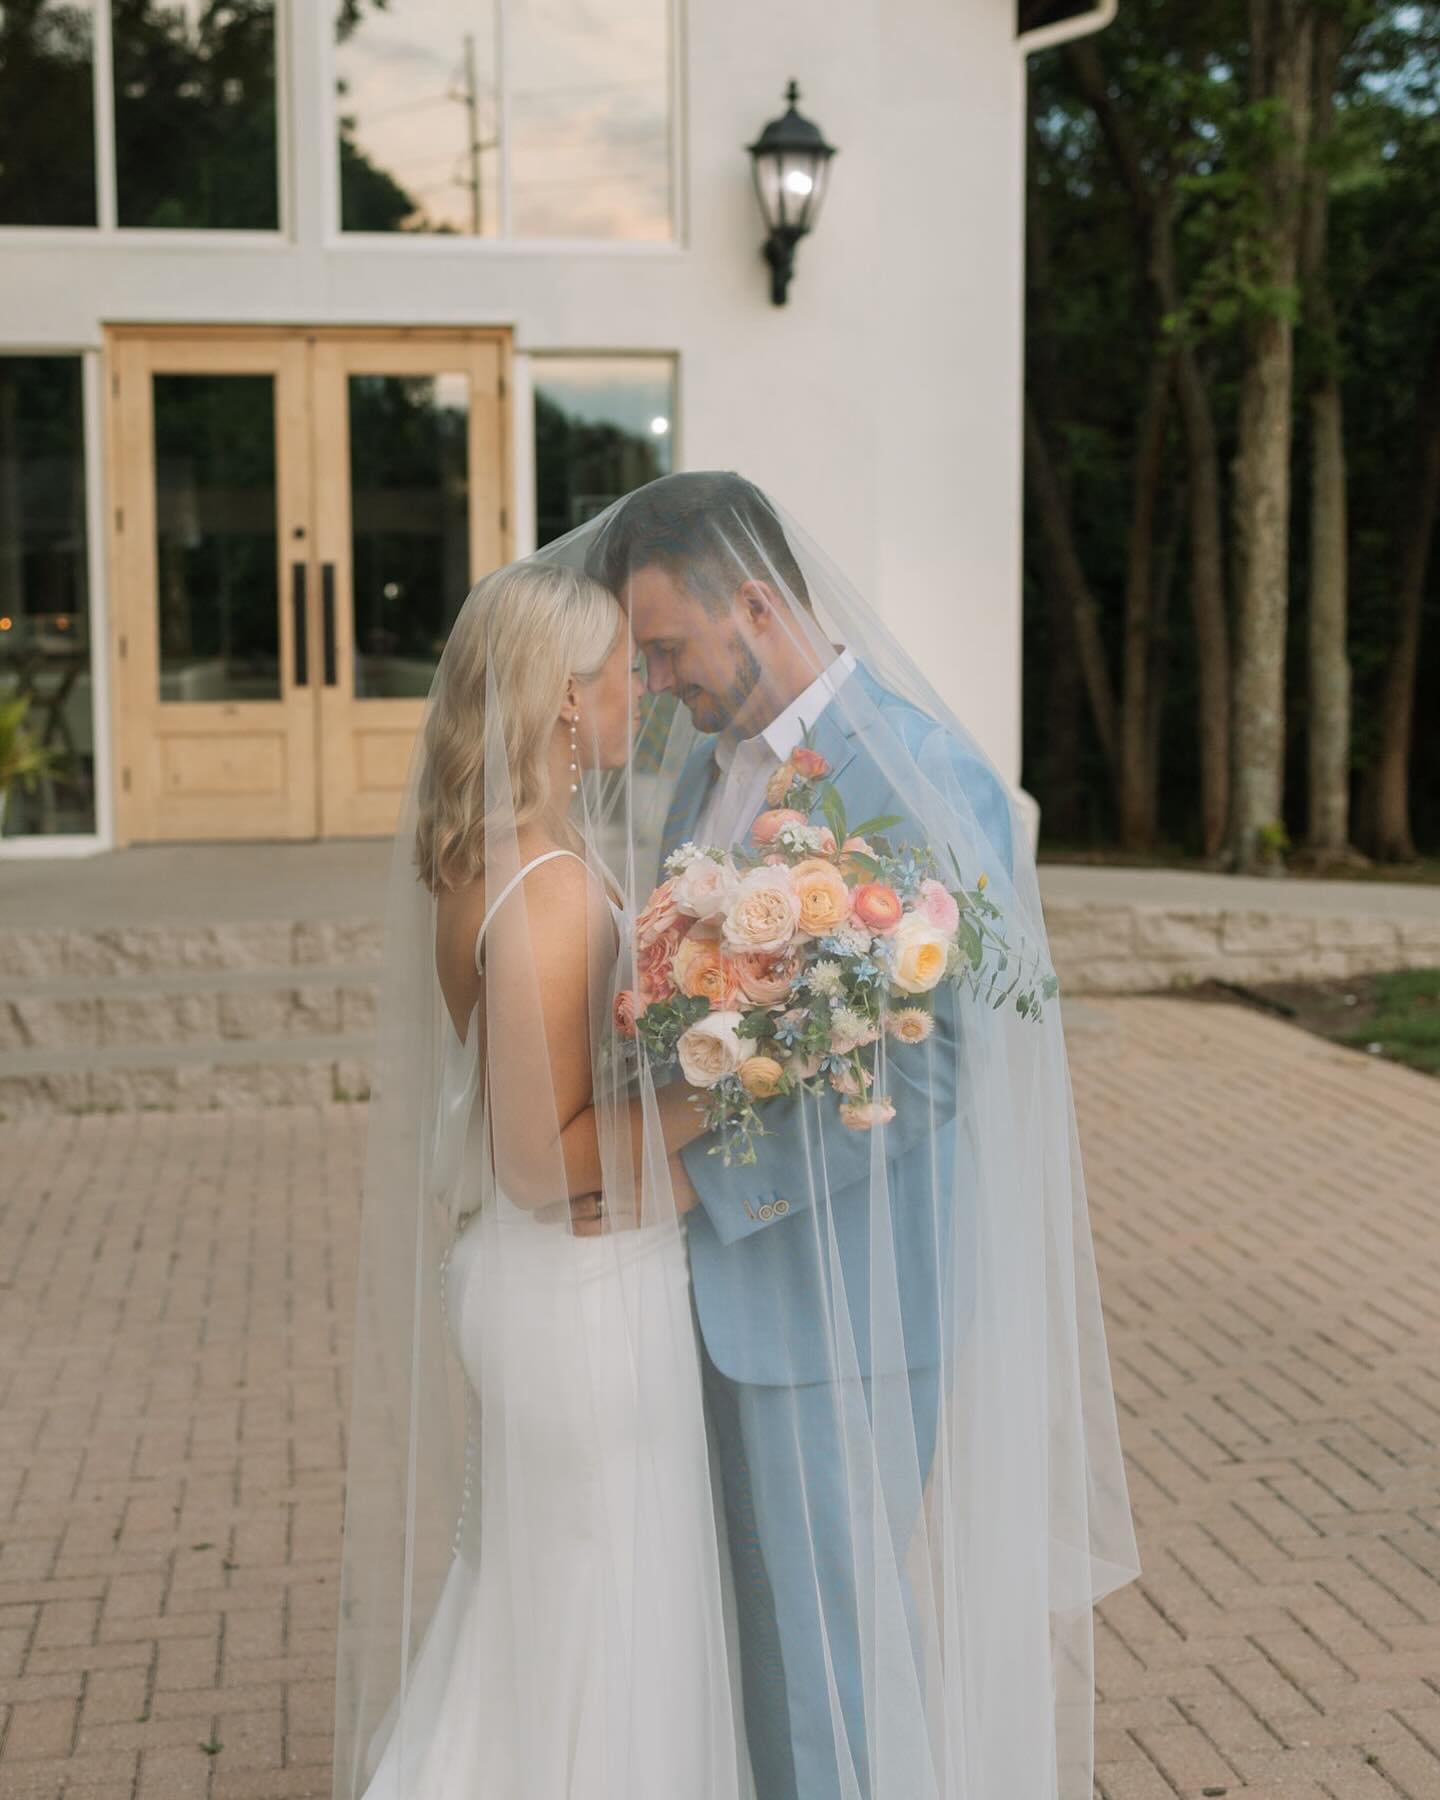 Madi + Andrew adding some sweet love to your daily Instagram scroll 🤙🏼 

But for real, is this picture not taking the term &ldquo;dreamy&rdquo; to a whole new level?! The veil, the colorful bouquet, the baby blue suit, and a gorgeous couple that&rs